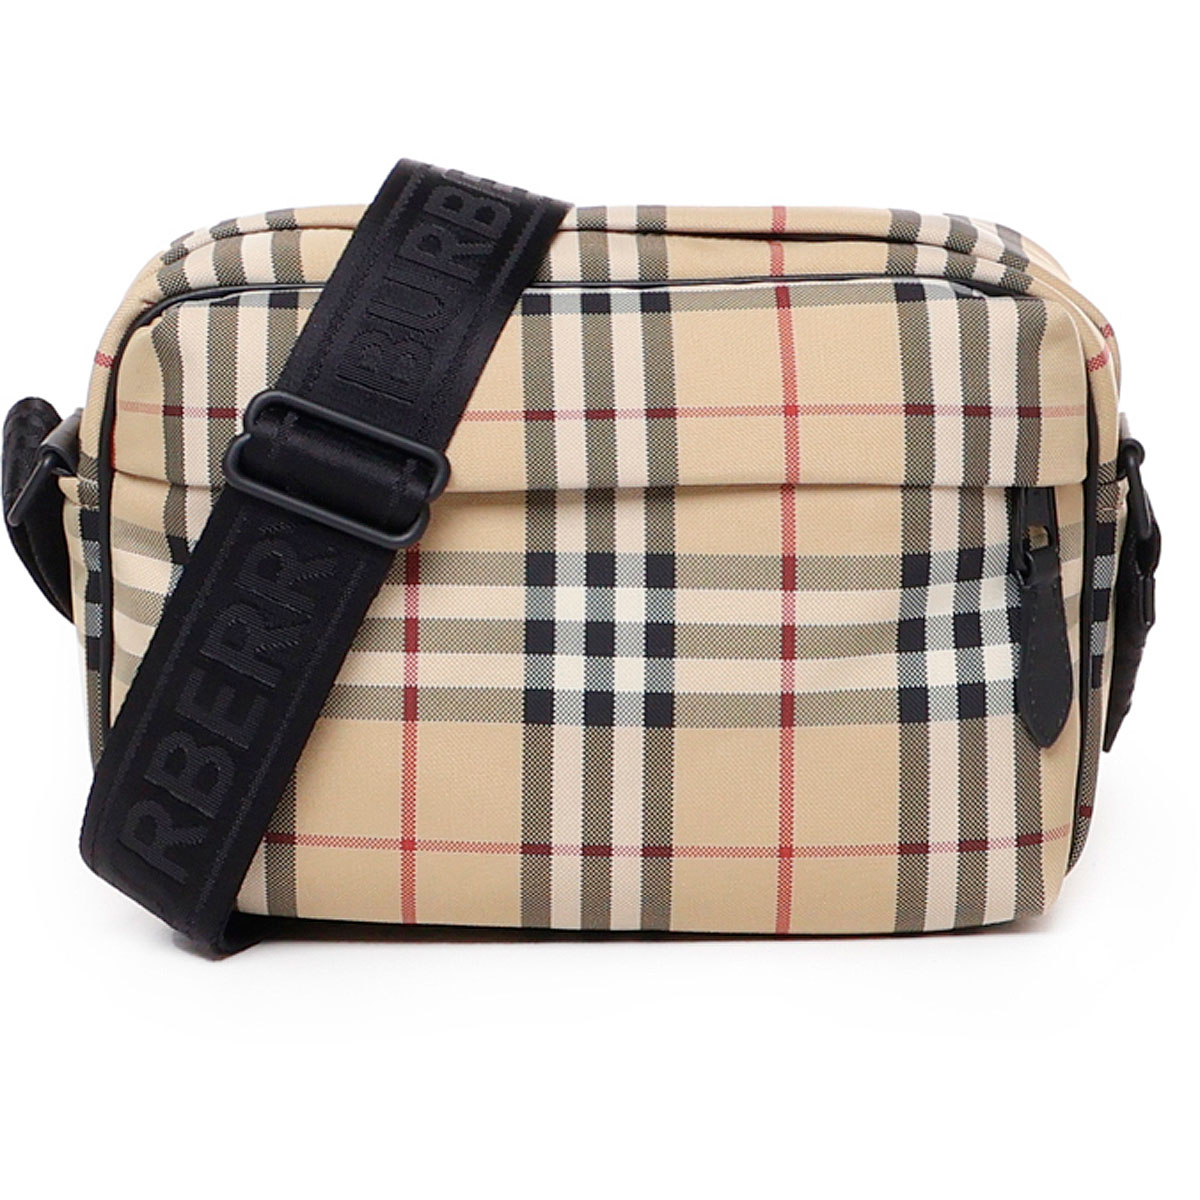 Briefcases Burberry, Style code: 8084111-A7026-